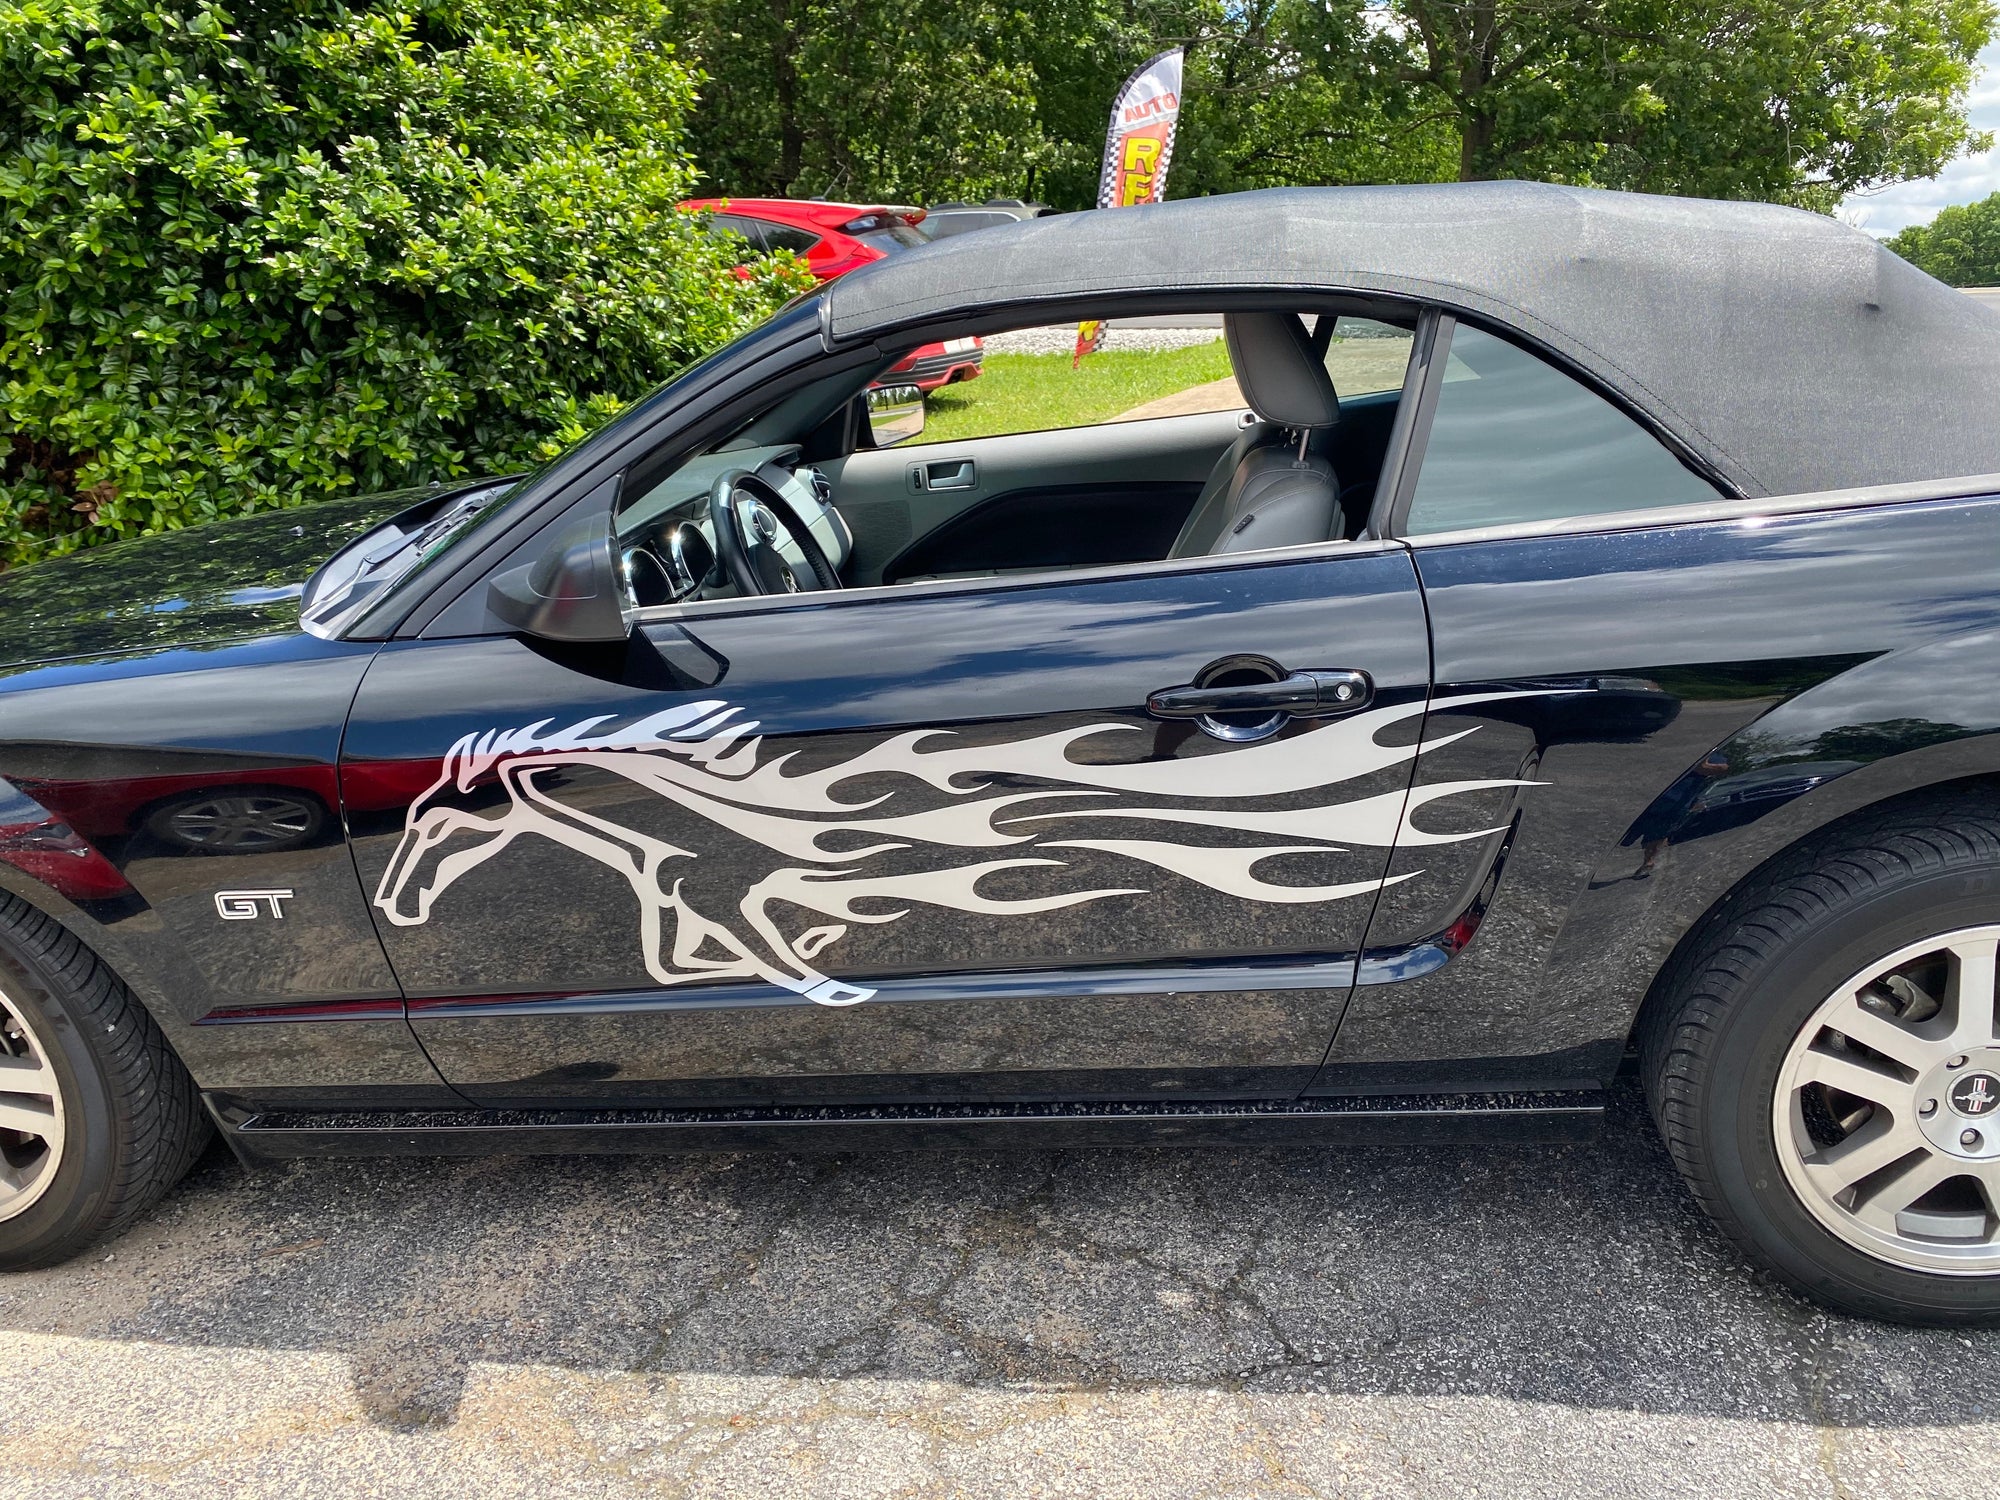 white horse flames decal on side of  black ford mustang gt